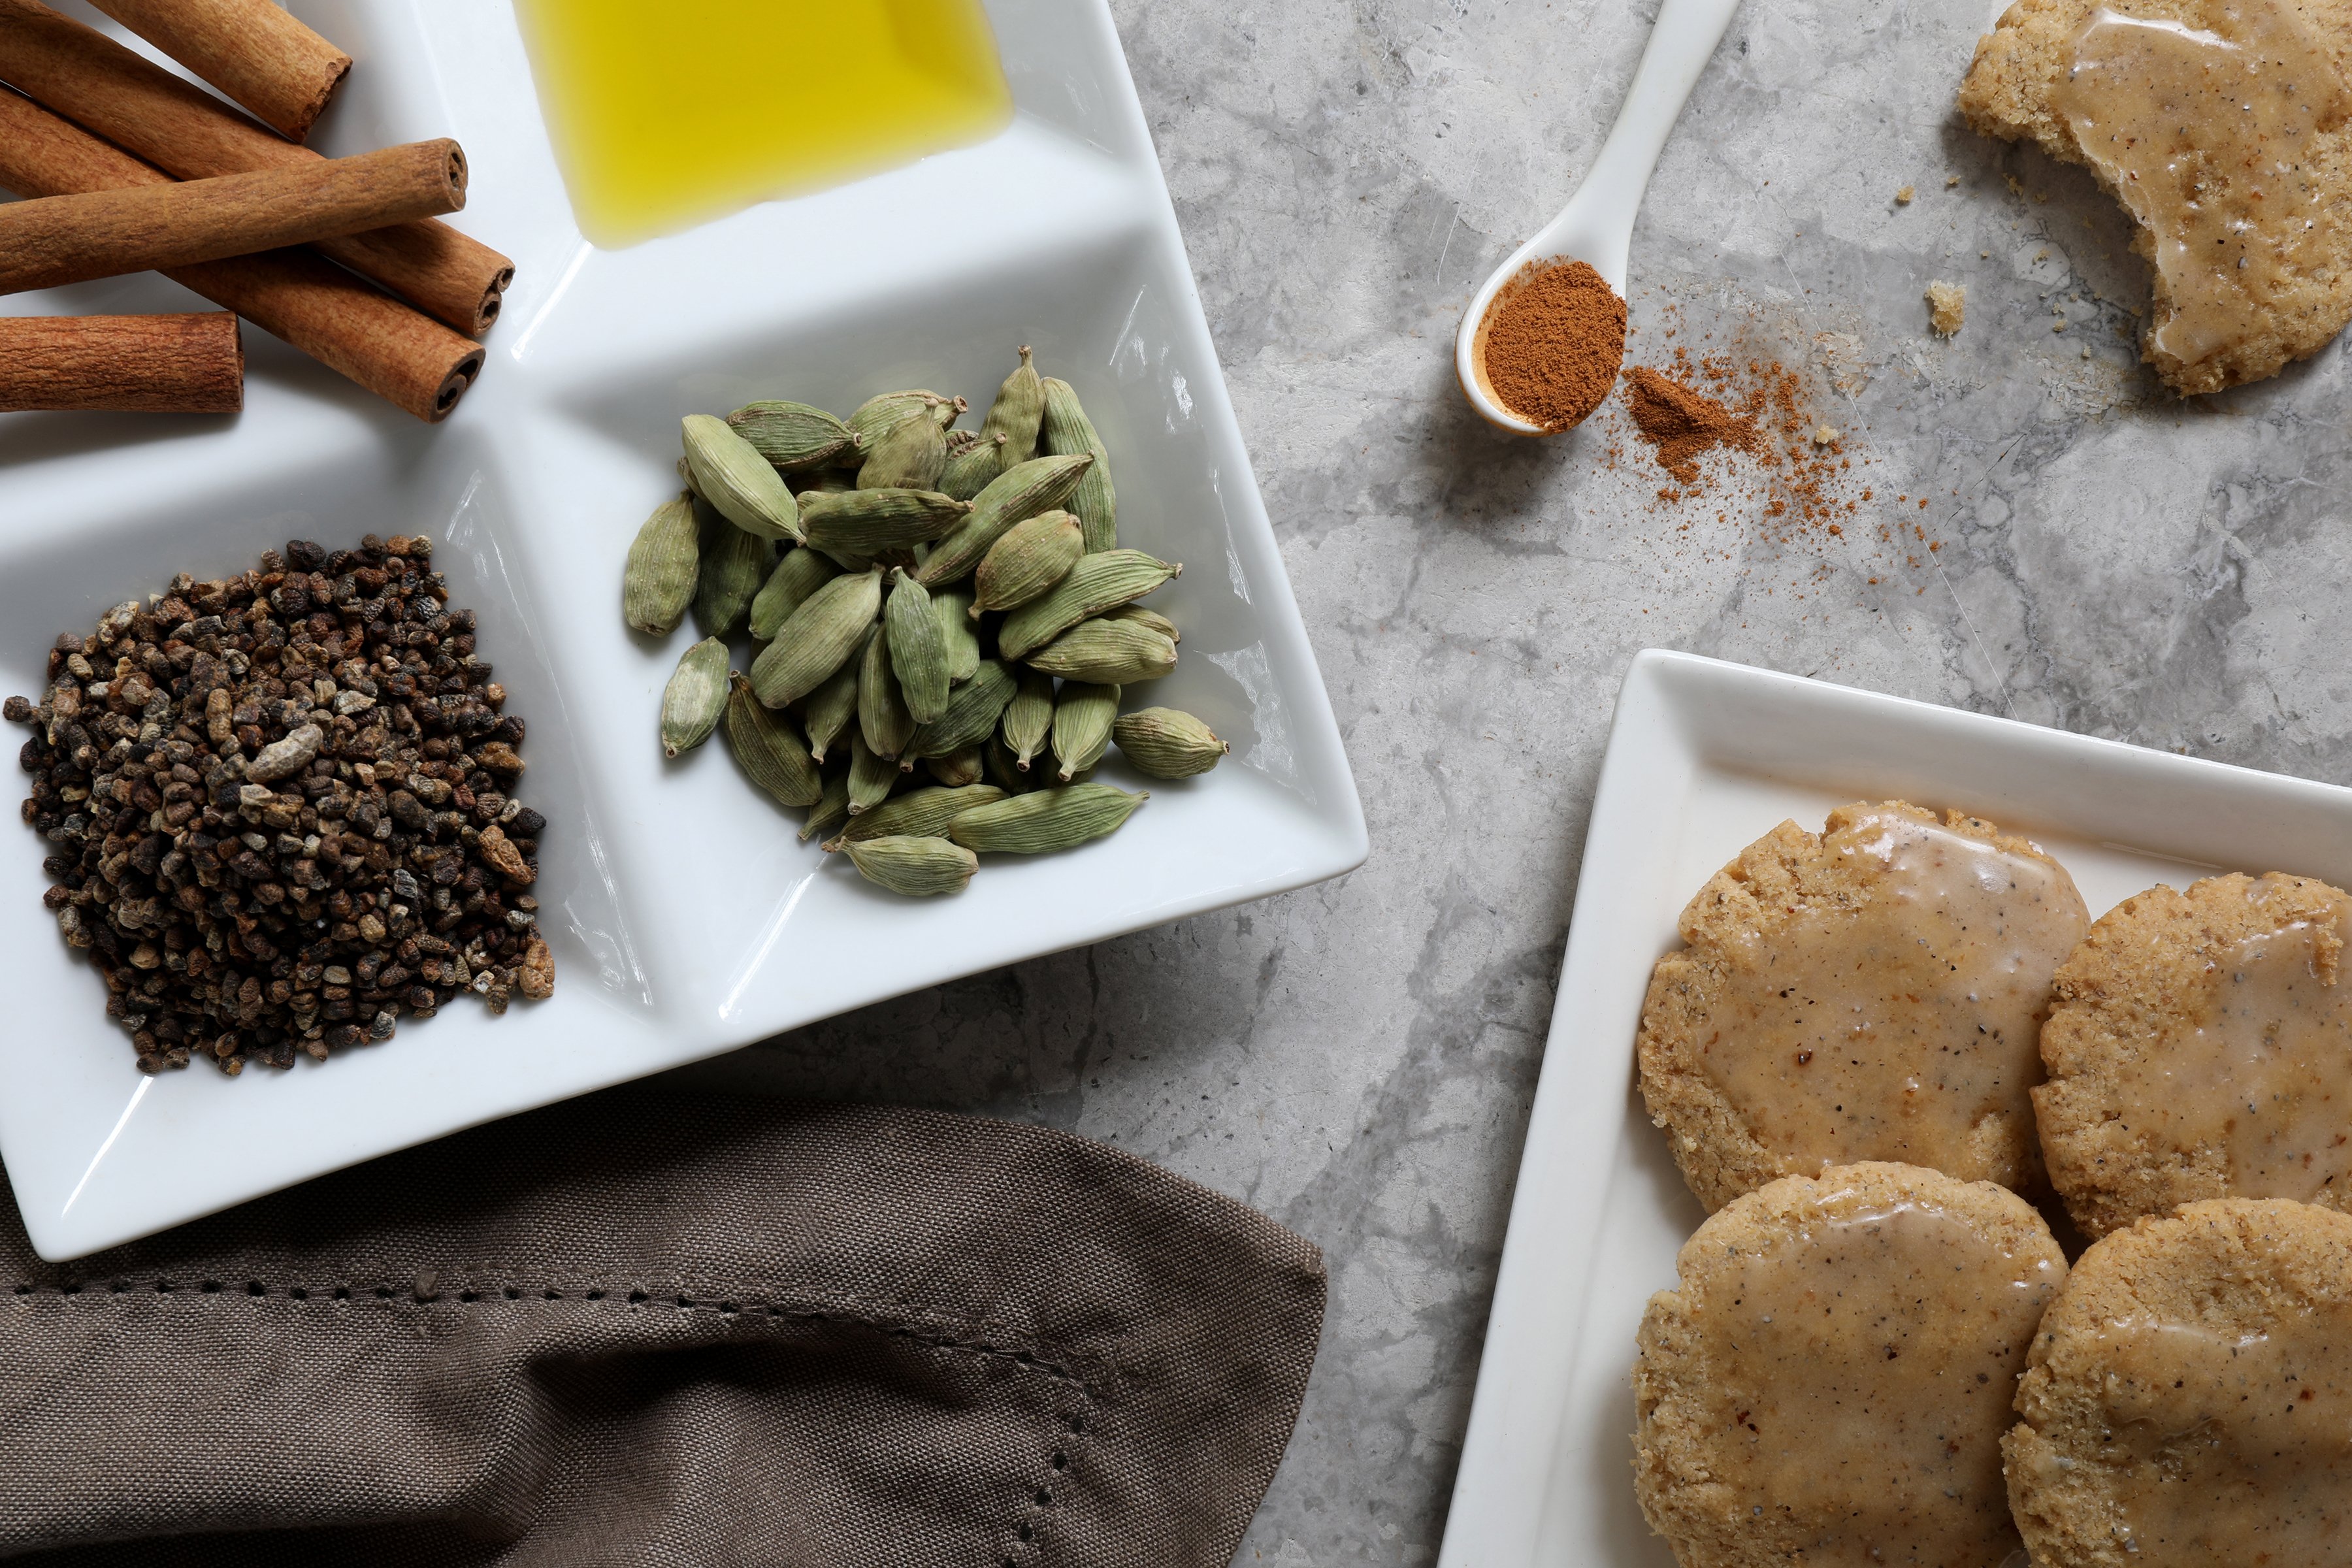 Ingredients together for making sweet and seasonal pumpkin pie spiced cookies. Cardamom pods, cloves, cinnamon sticks.